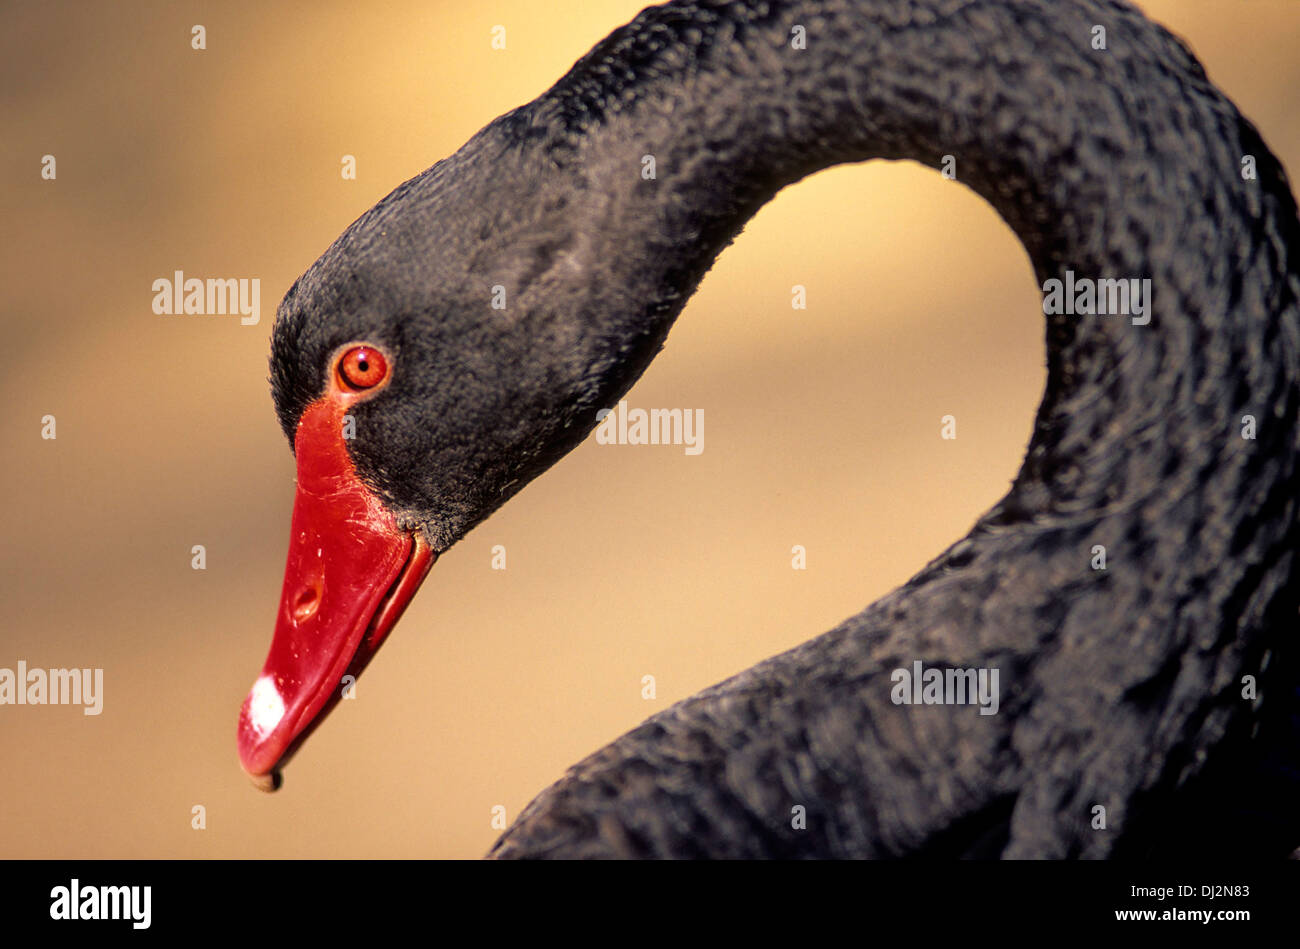 Black Swan High Resolution Photography and Images - Alamy